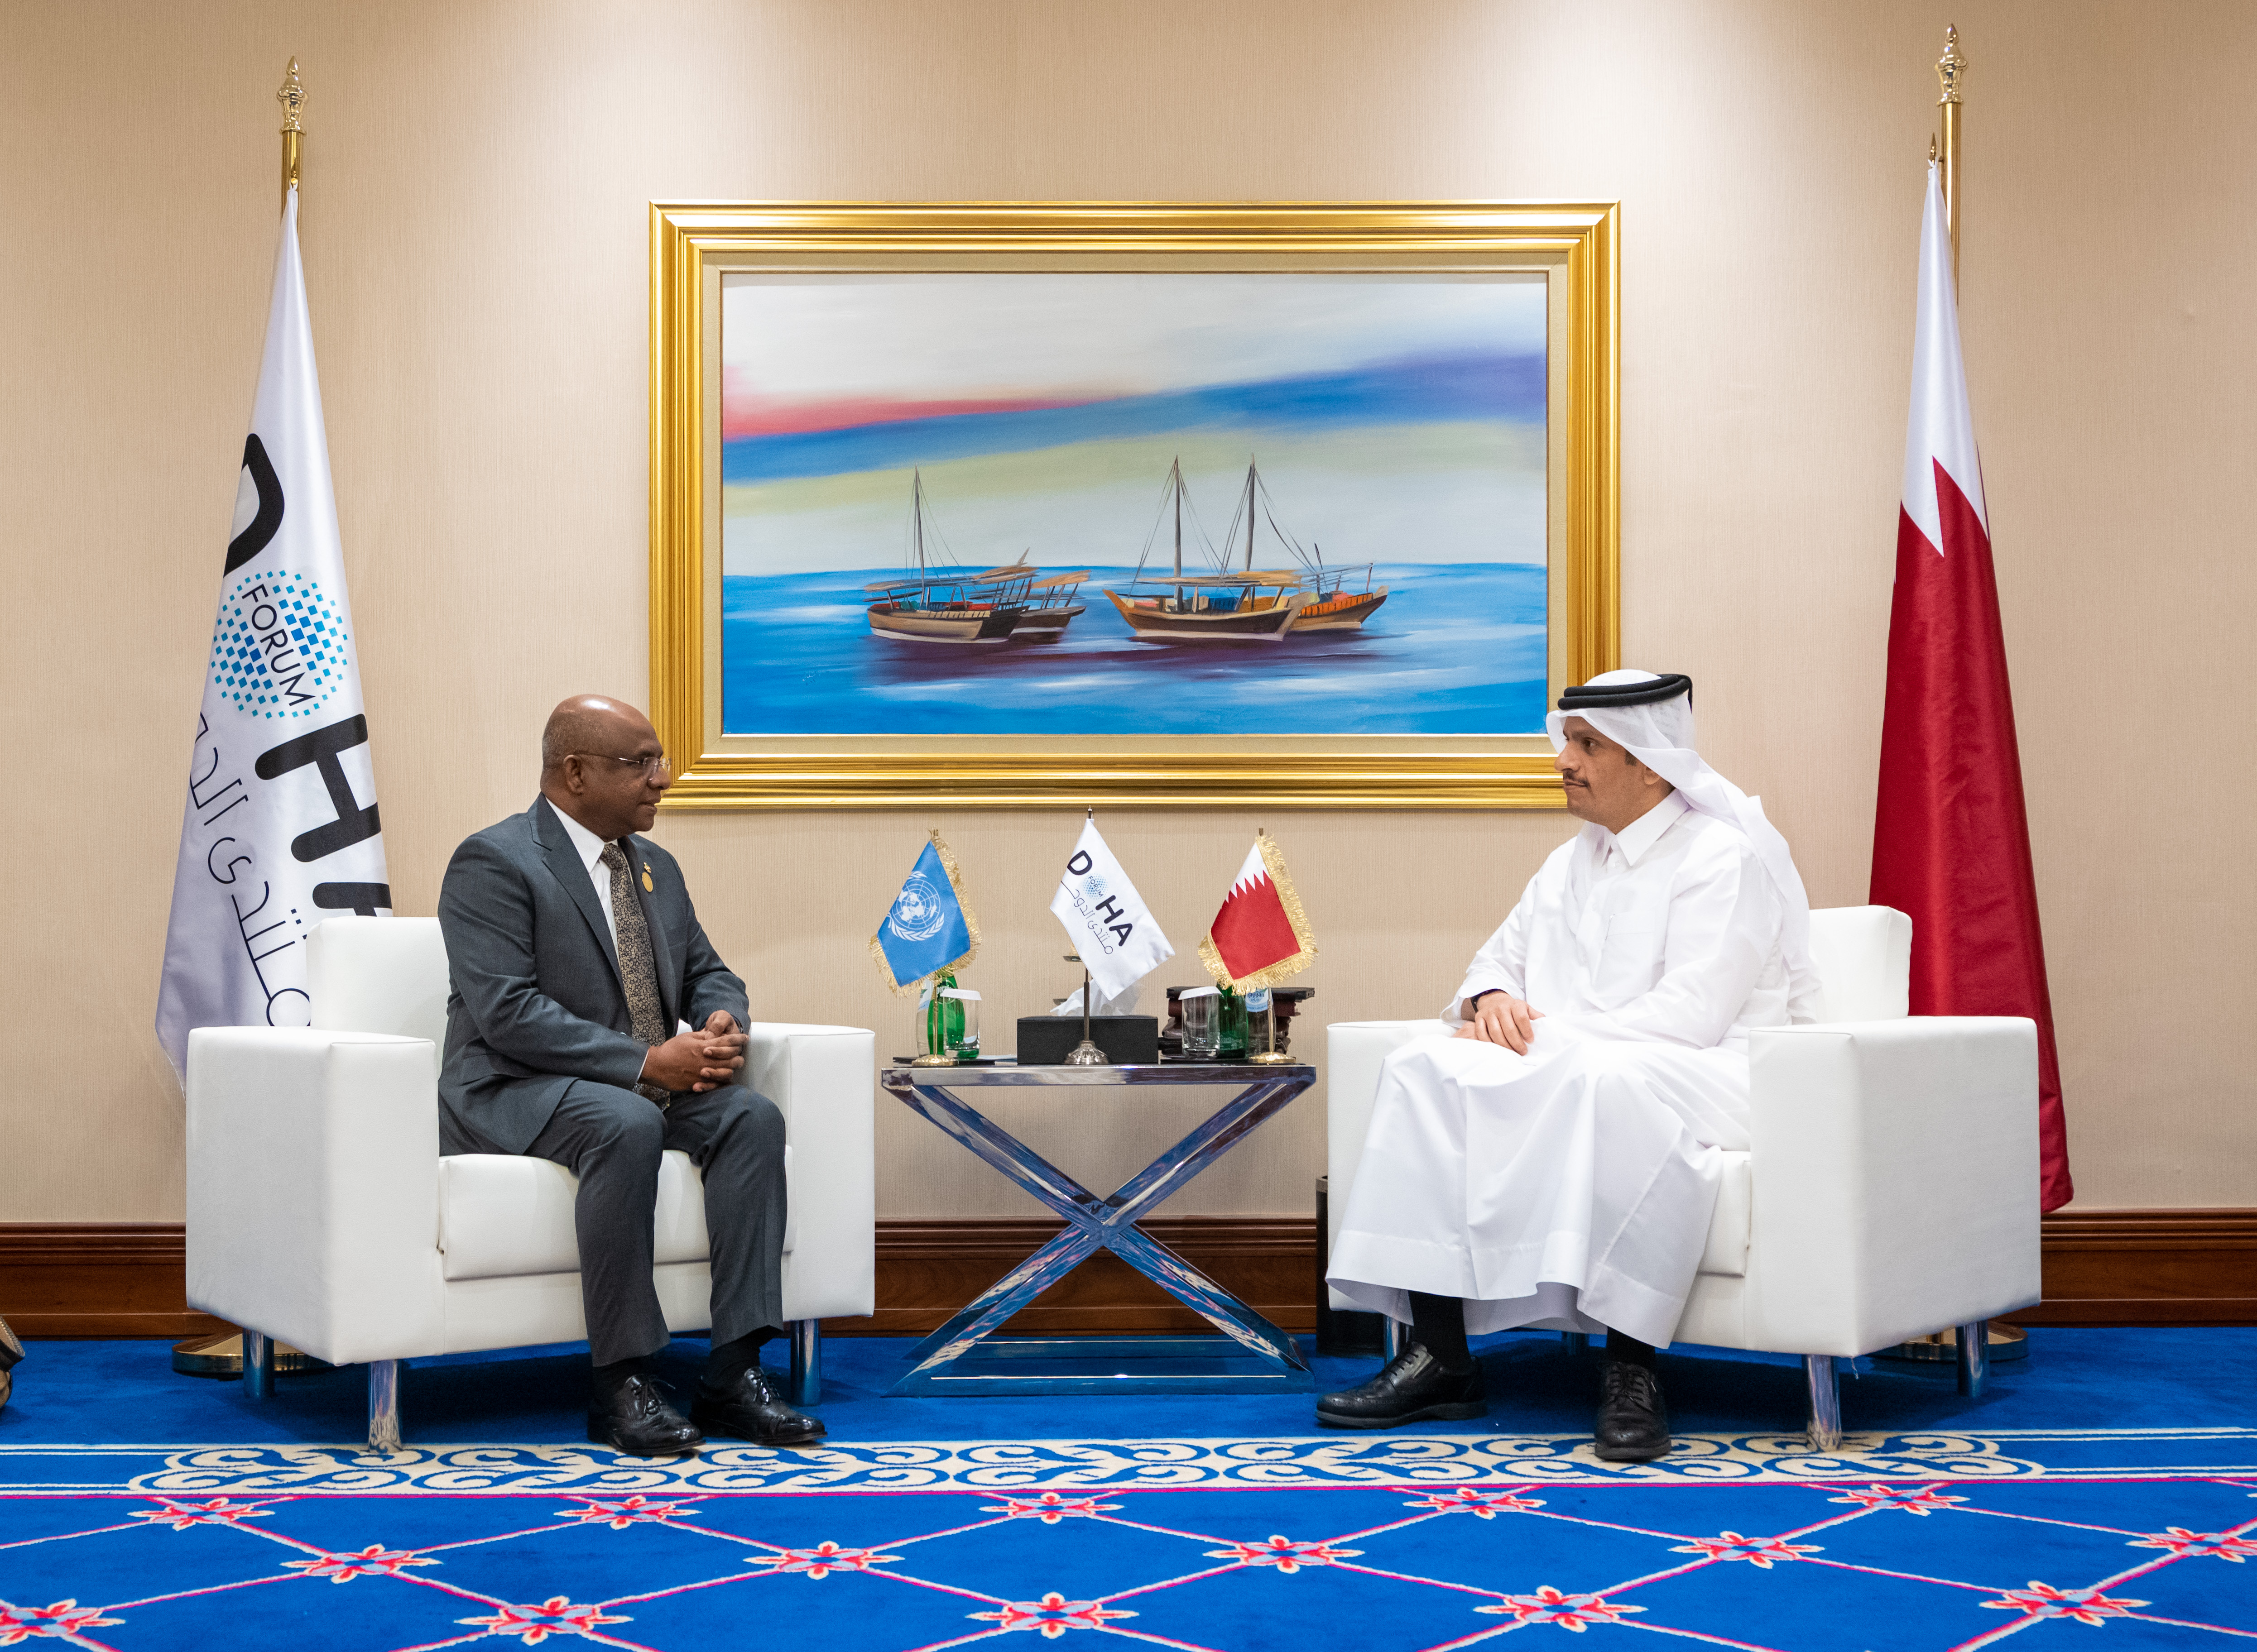 HE Deputy Prime Minister and Minister of Foreign Affairs Meets President of the 76th Session of the UN General Assembly